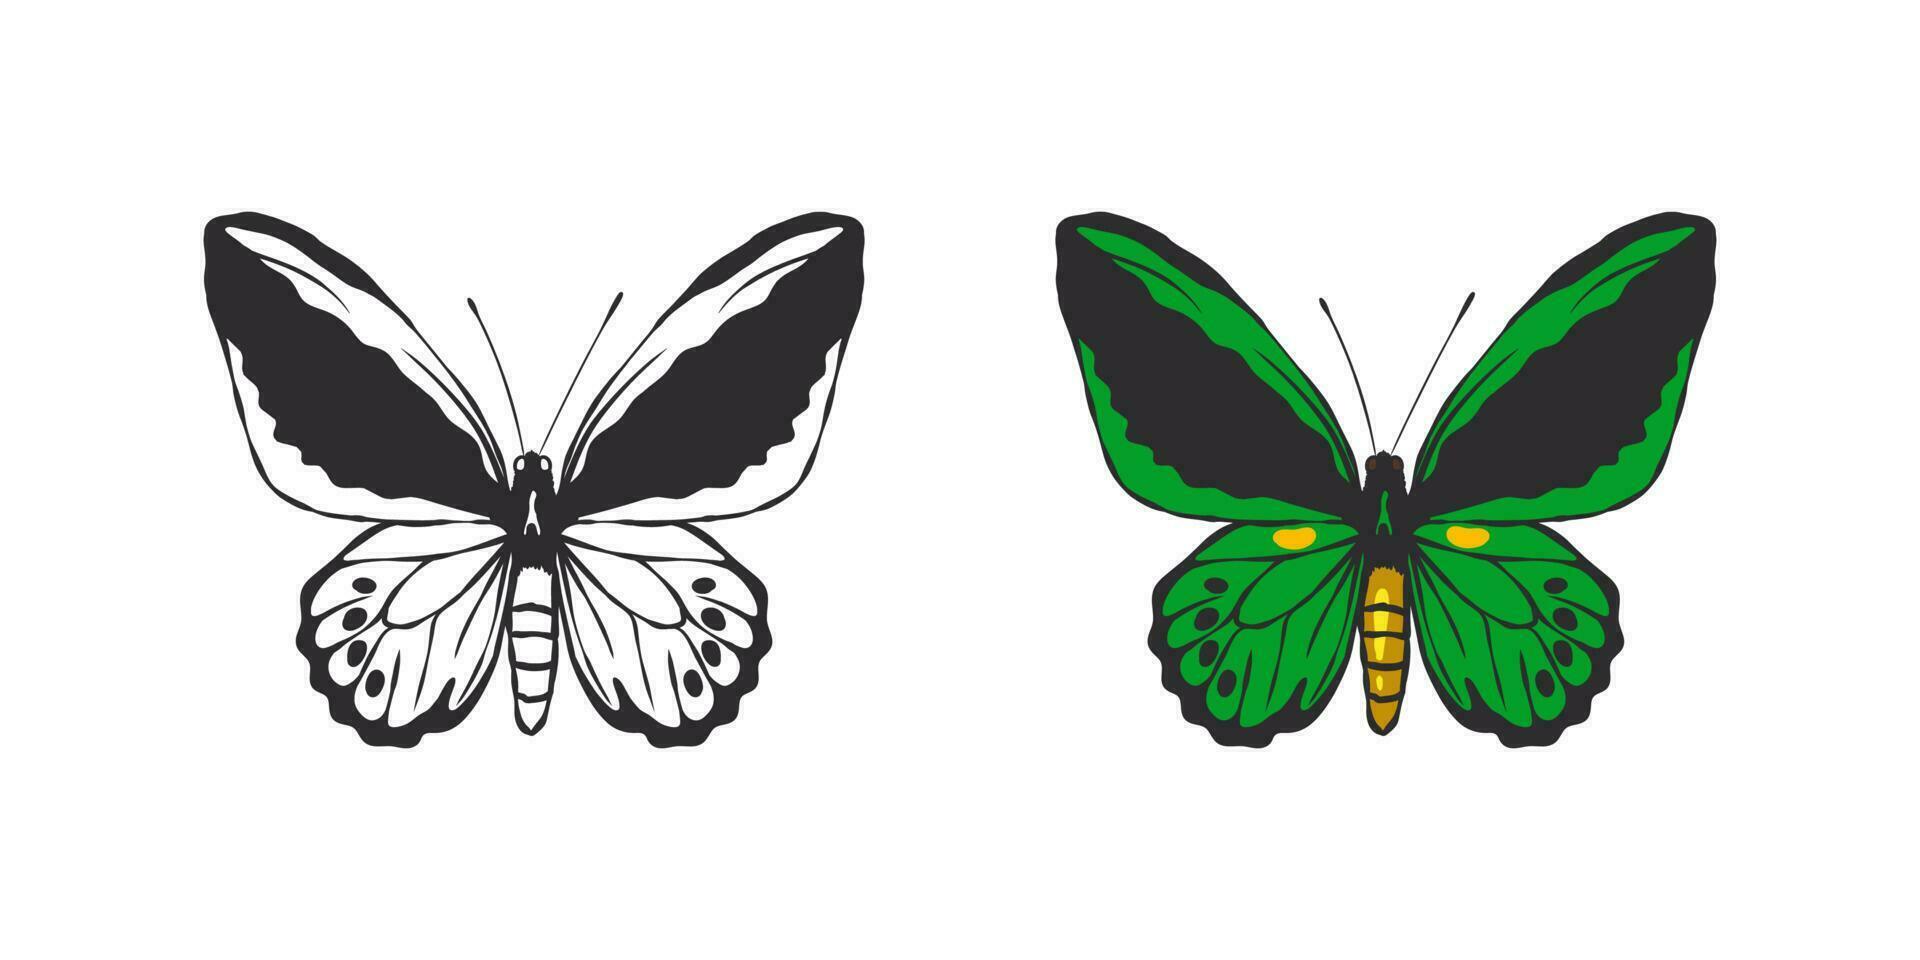 Butterflies images. Hand drawn green butterfly. Pictures of funny butterflies. Vector scalable graphics